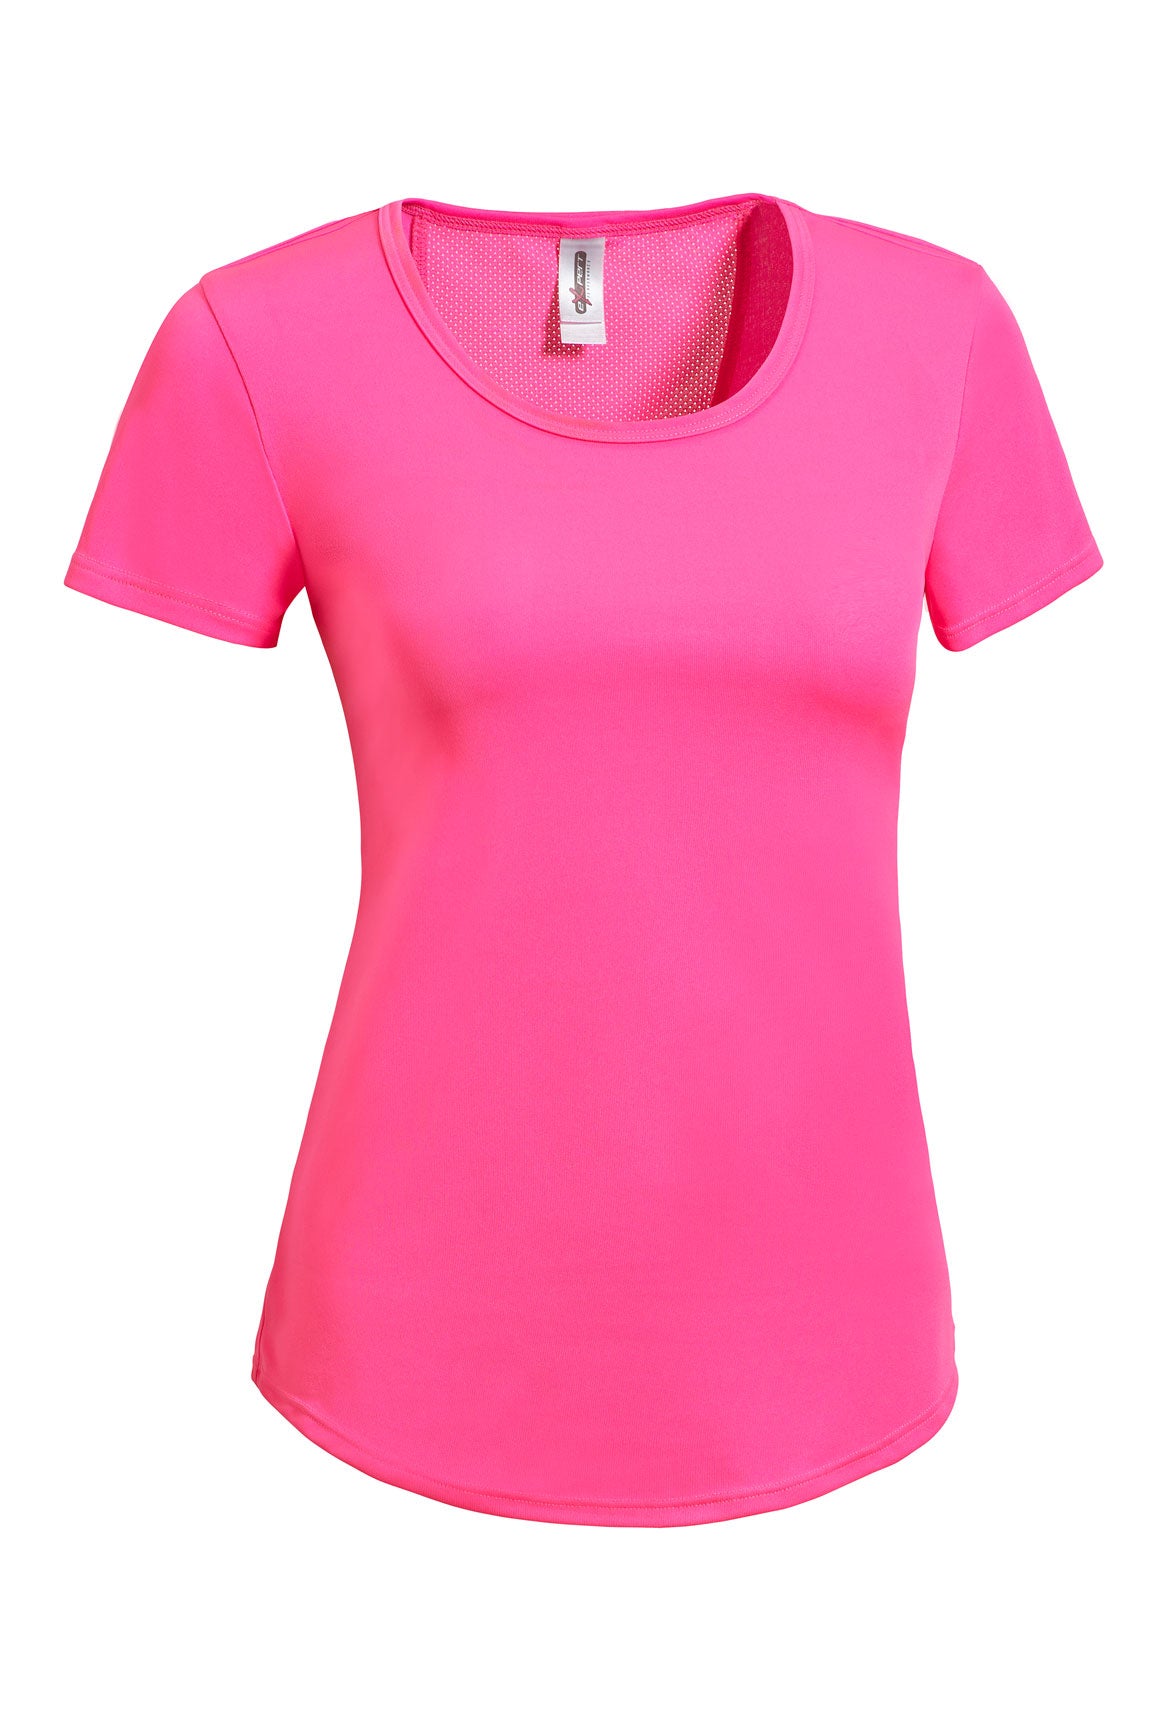 Expert Brand Wholesale Made in USA Women's Angel Mesh Cinch Tee AI233 in Hot Pink#hot-pink